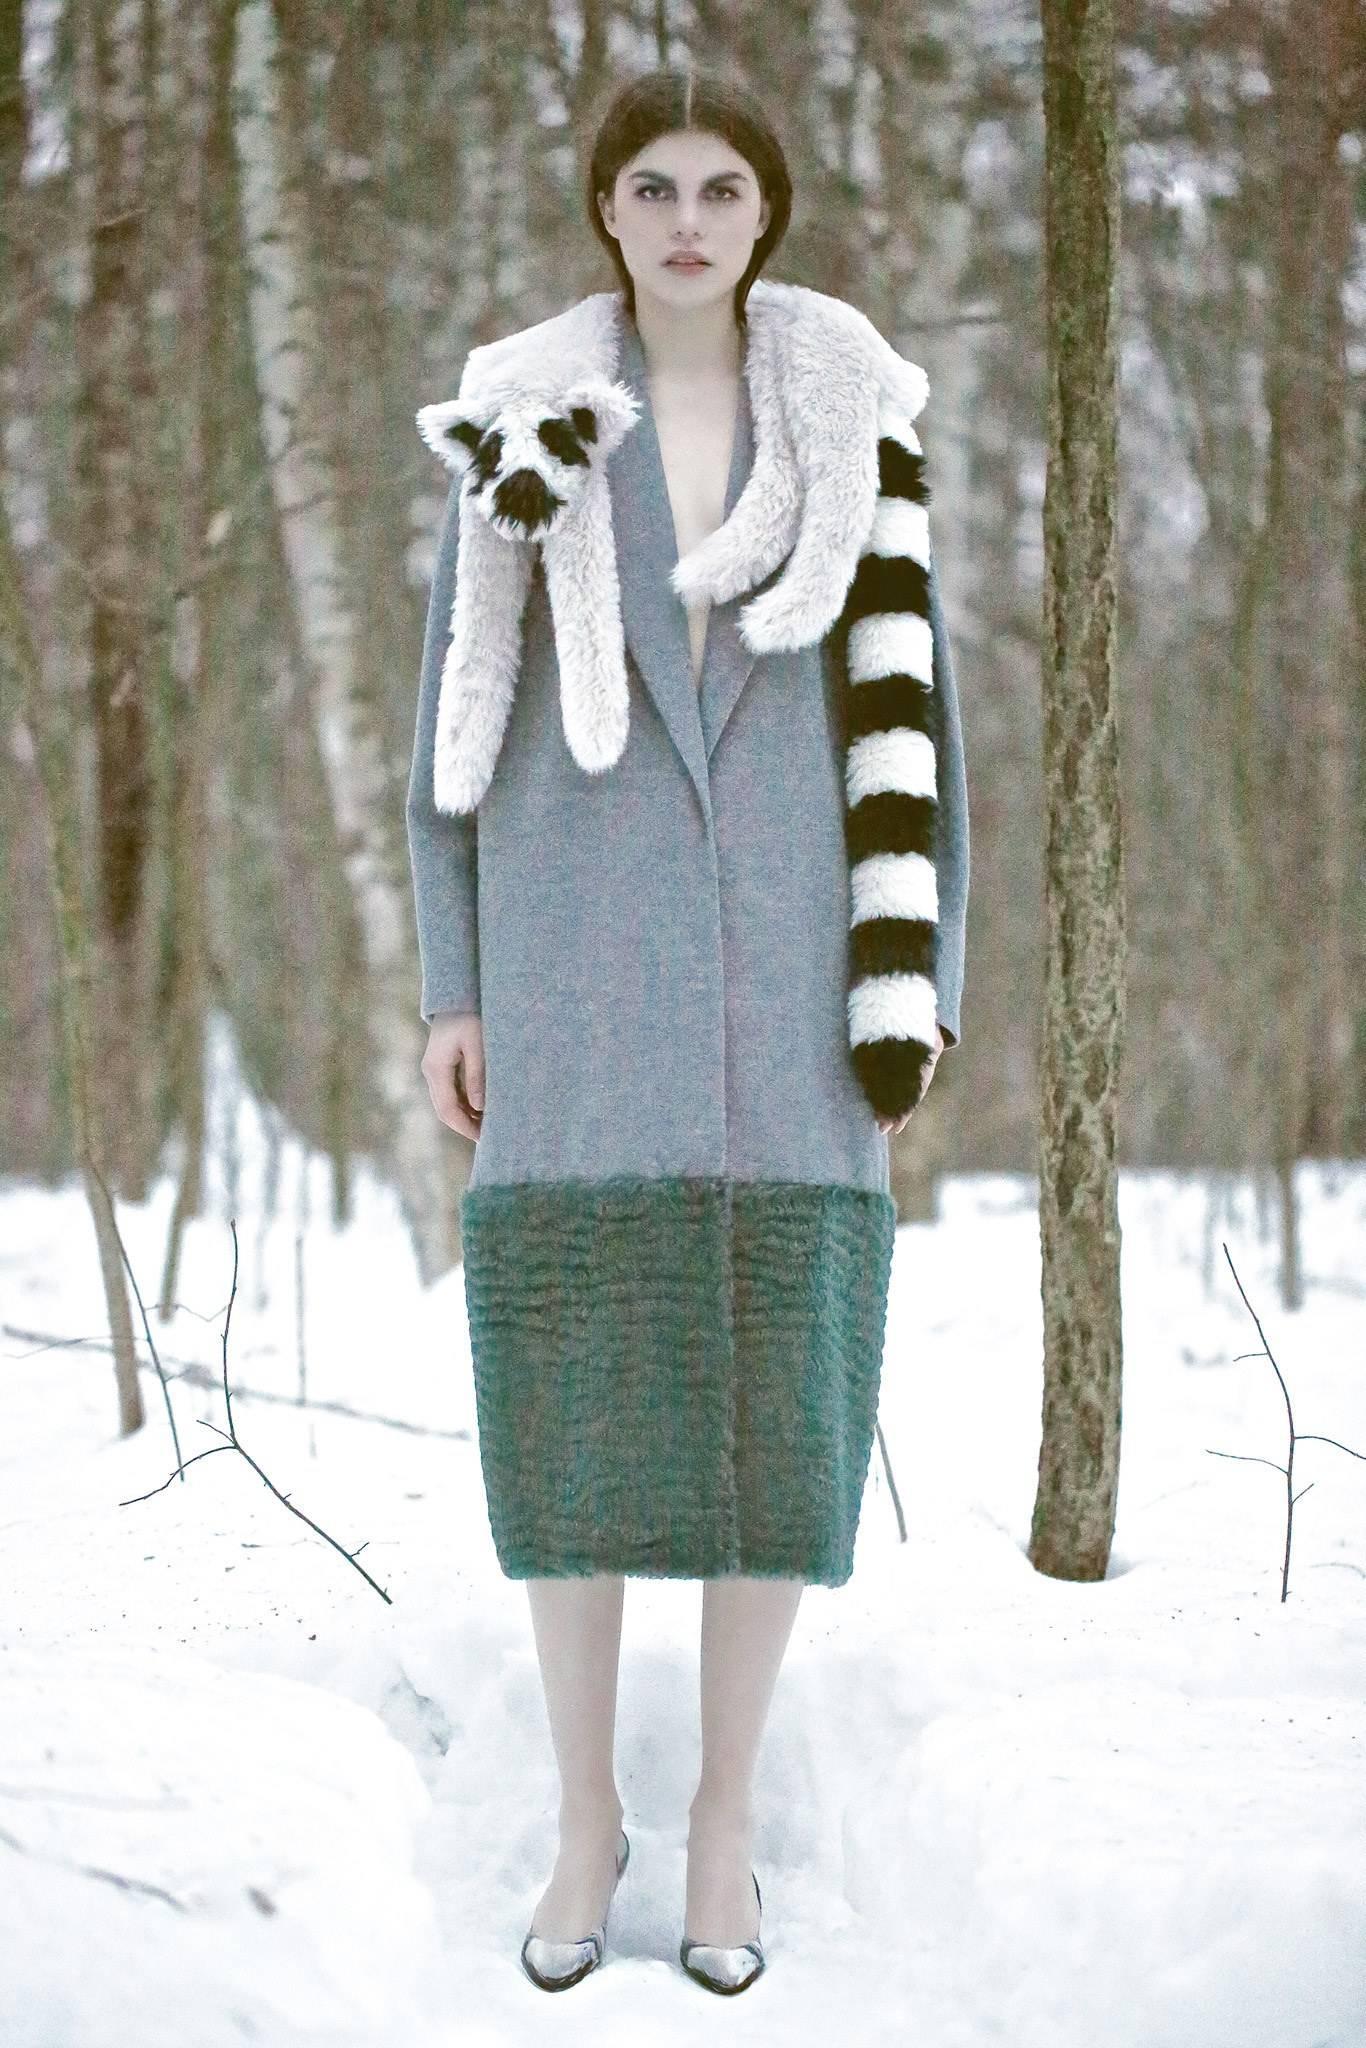 Vika Gazinskaya Grey Wool Coat with Green Faux Fur Trim.  From the fall 2013 collection.  Original retail price $3395.  Coat has side hip pockets on seam, unlined, and fastens at front with 3 snaps. Lighter weight fall coat and not a heavy wool